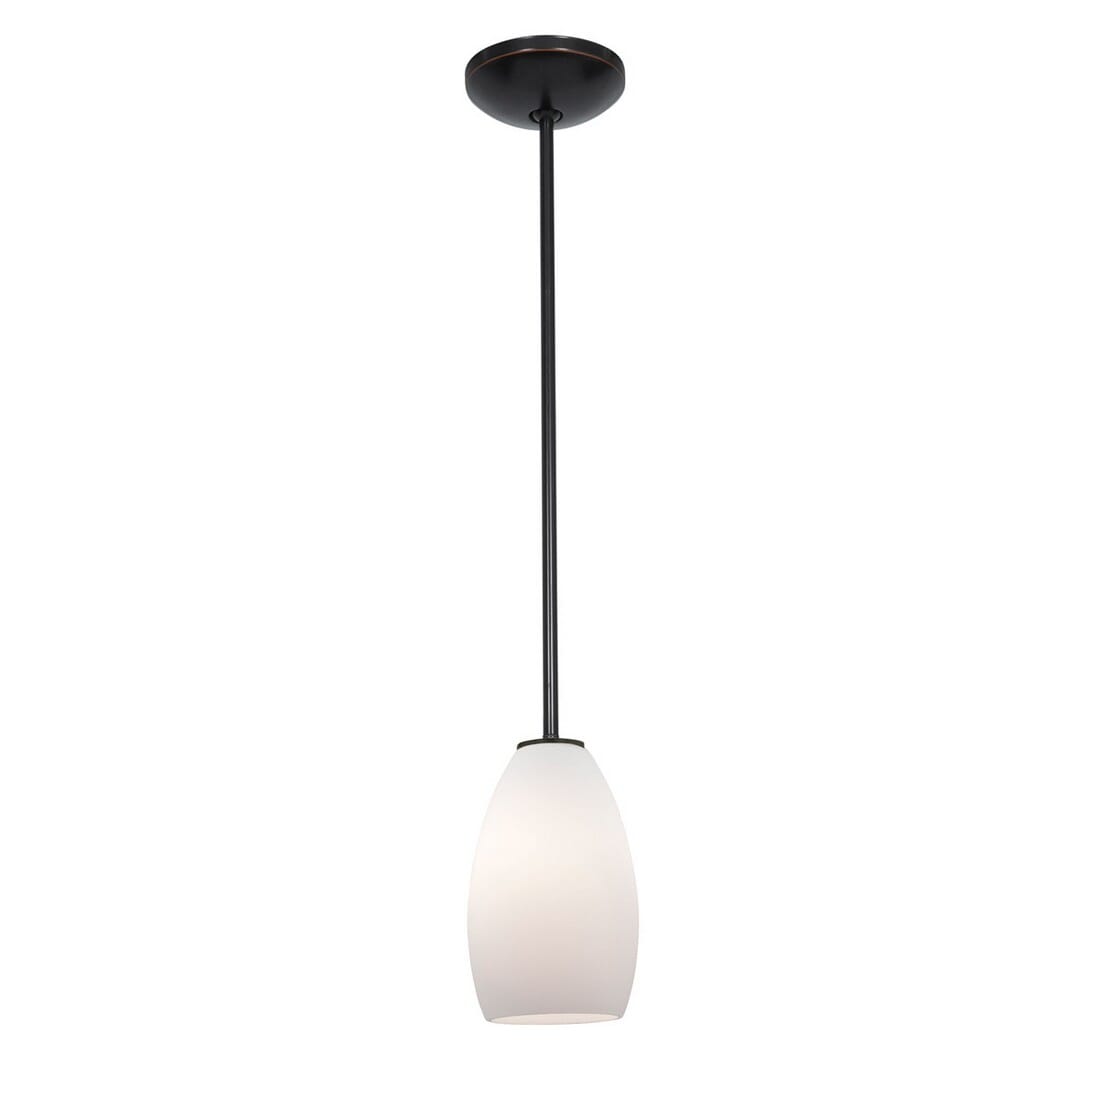 Access Champagne Pendant Light in Oil Rubbed Bronze -  Access Lighting, 28012-1C-ORB/OPL